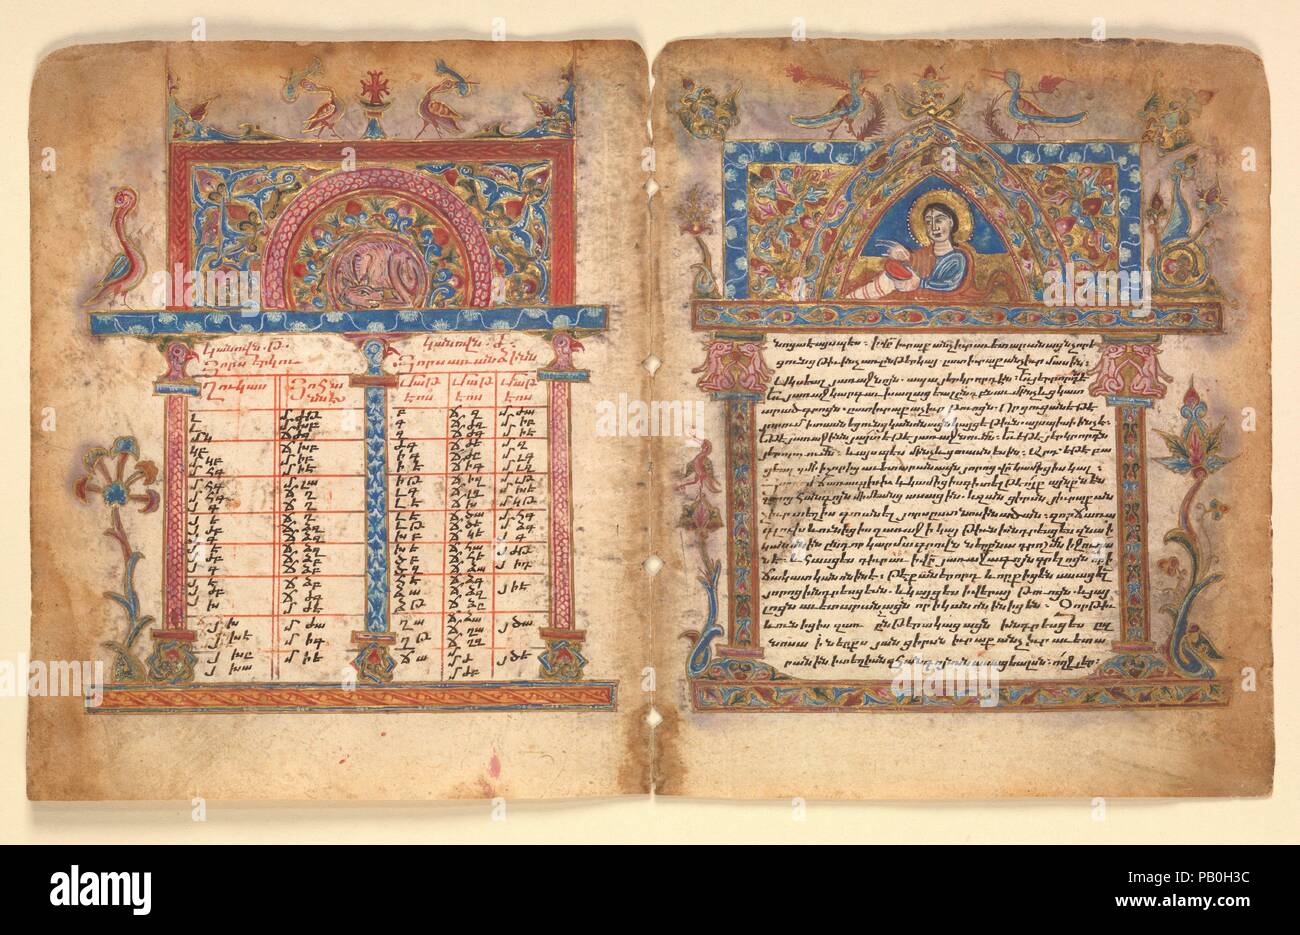 Armenian Manuscript Bifolium. Artist: Illuminator Minas (?) (active in region of Vaspurakan (now eastern Turkey)). Culture: Armenian. Dimensions: bifolio: 6 3/8 × 10 1/2 in. (16.2 × 26.6 cm)  Other (folio): 6 3/8 × 5 1/4 in. (16.2 × 13.3 cm)  Frame: 16 5/8 × 20 1/8 × 7/8 in. (42.2 × 51.1 × 2.2 cm). Date: 15th century.  Canon tables, a widely used comparative index to the gospels, were developed by Eusebius of Caesarea for his pupil Carpianus who appears in the headpiece of the explanatory page on the right. When bound, the tables on the left would have been one of the following index pages. Mu Stock Photo